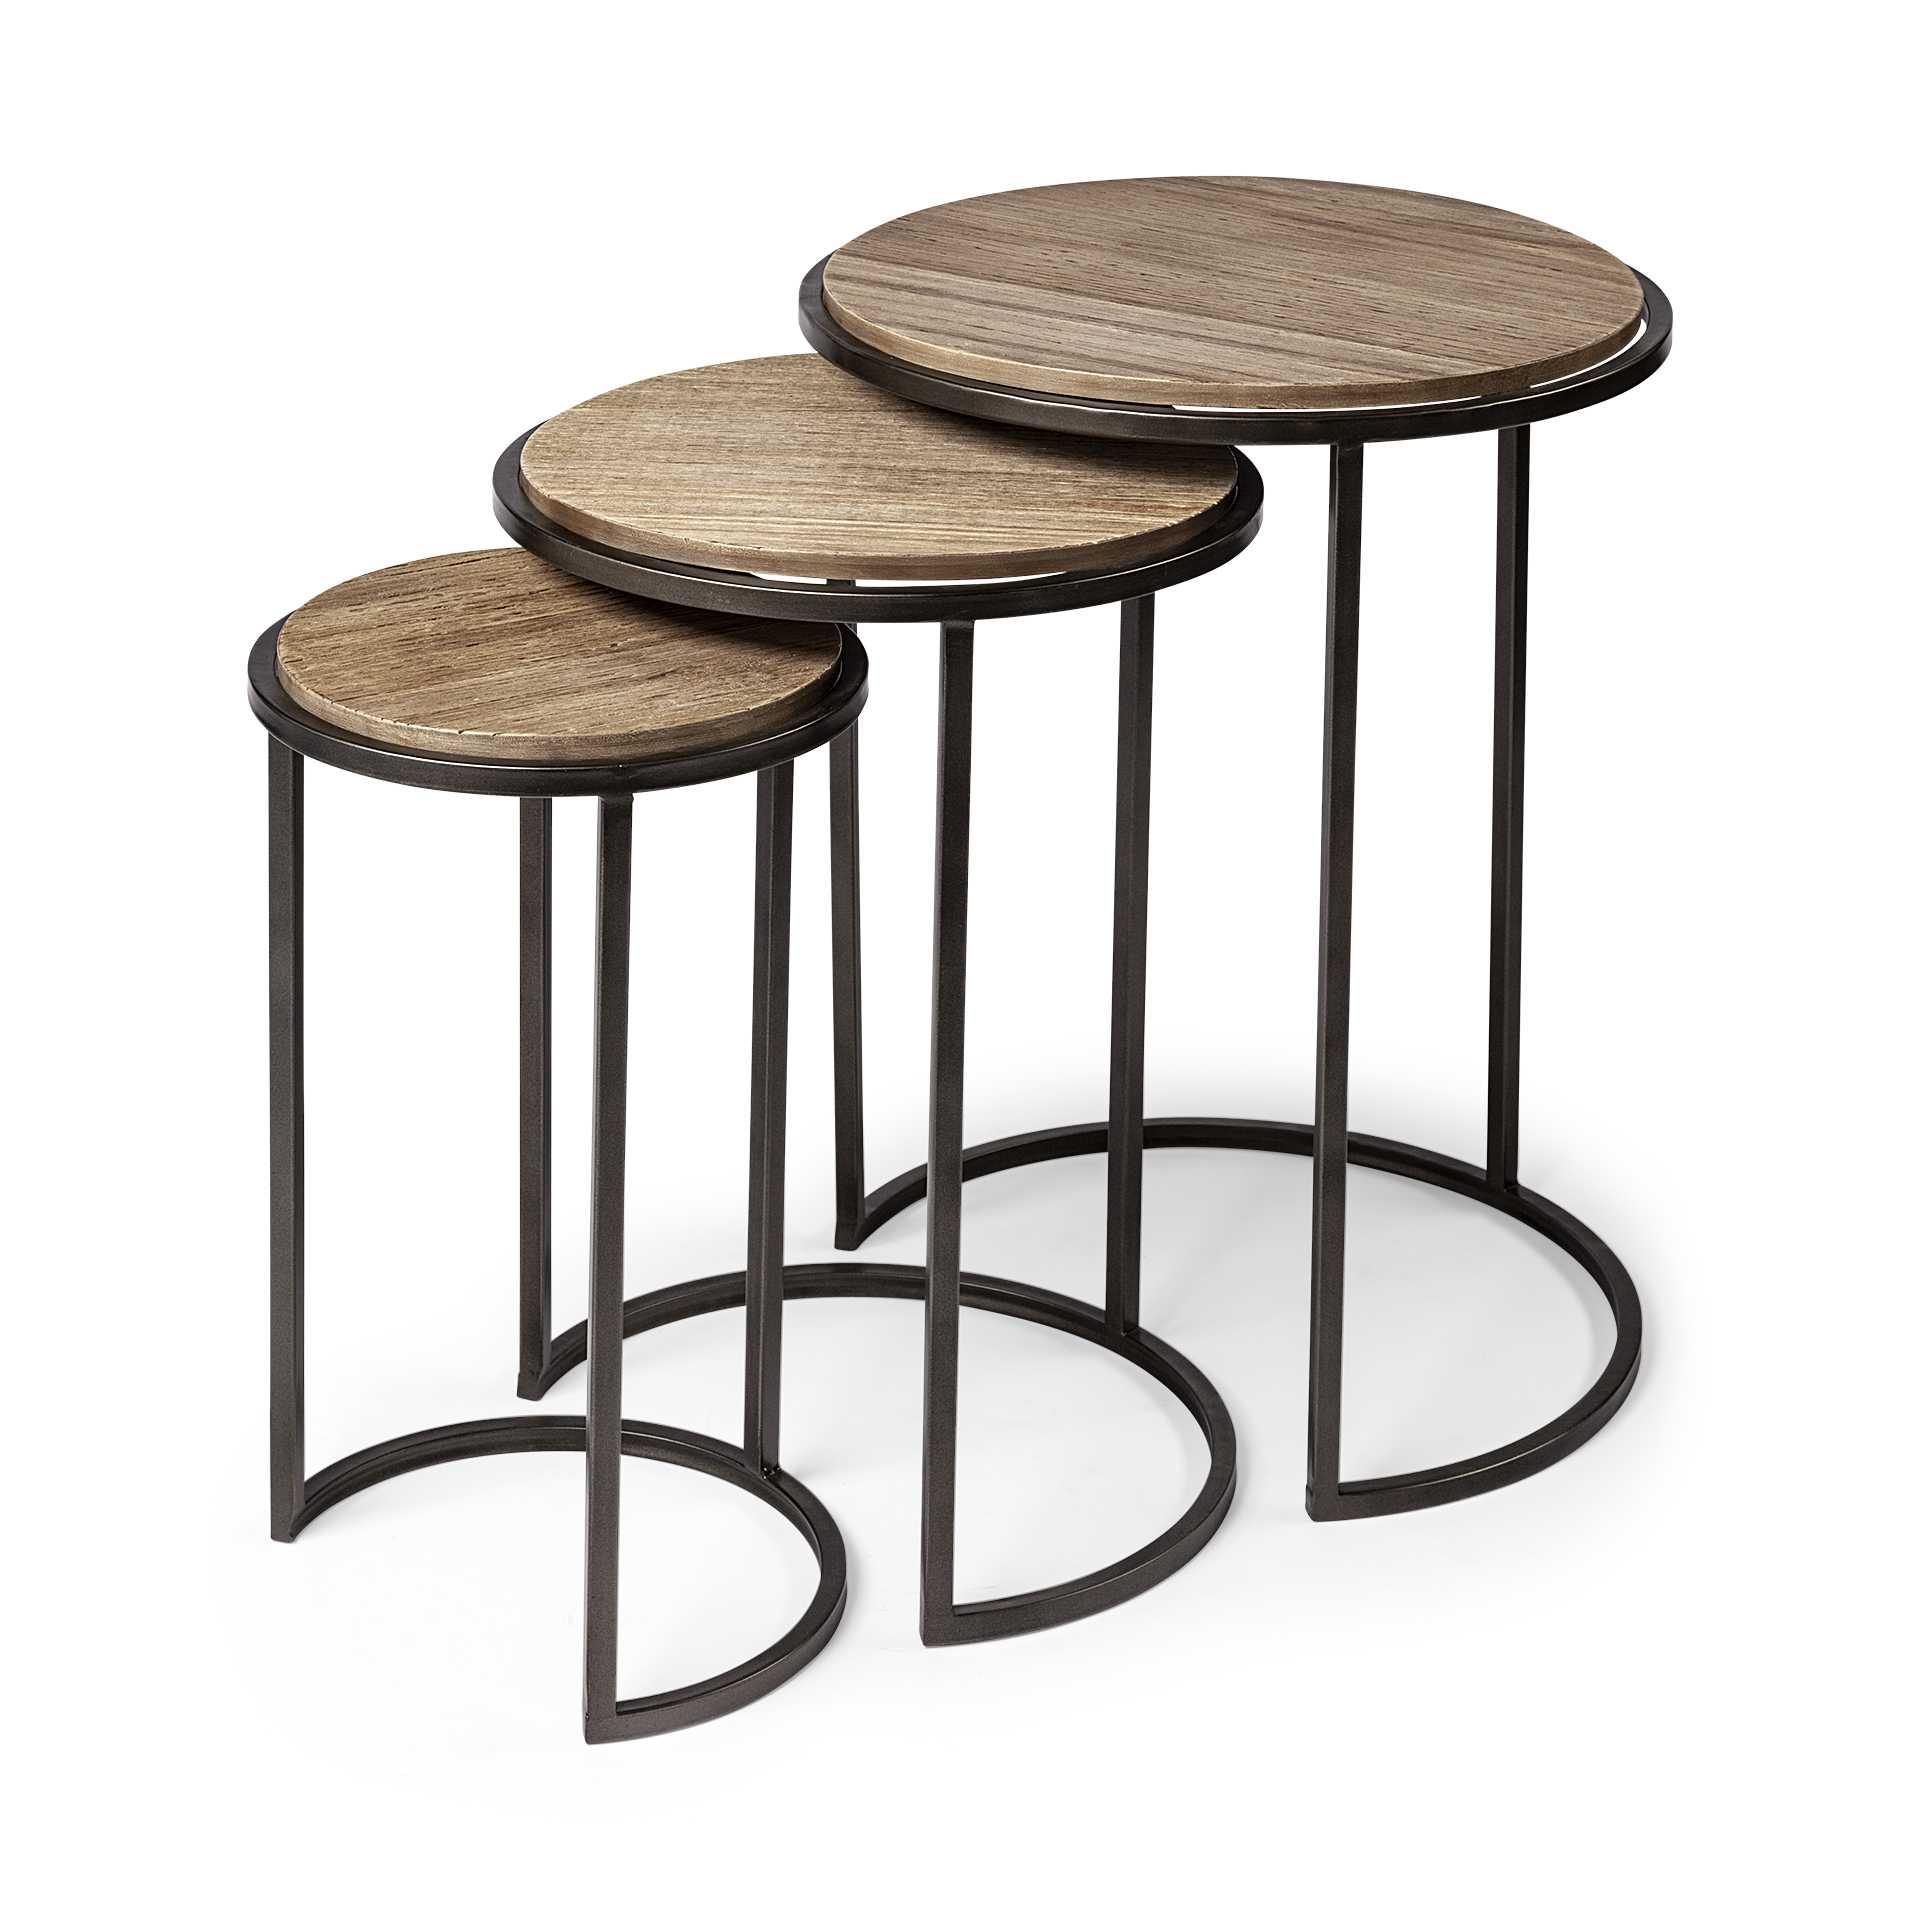 Set of 3 Brown Wood Round Top Accent Tables with Iron Nesting